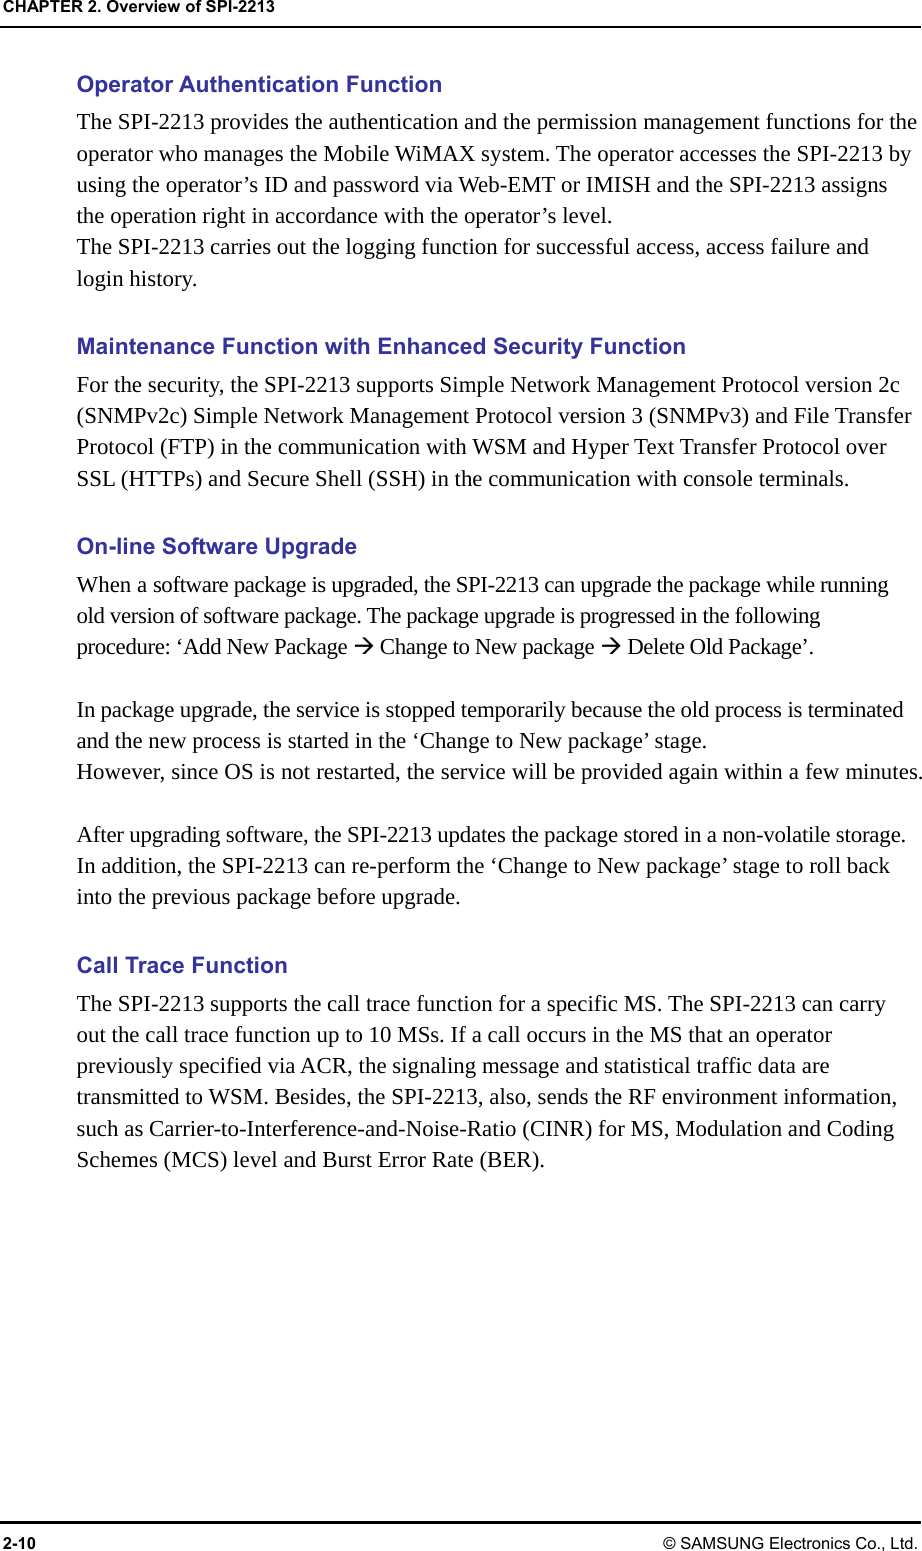 CHAPTER 2. Overview of SPI-2213 2-10 © SAMSUNG Electronics Co., Ltd. Operator Authentication Function The SPI-2213 provides the authentication and the permission management functions for the operator who manages the Mobile WiMAX system. The operator accesses the SPI-2213 by using the operator’s ID and password via Web-EMT or IMISH and the SPI-2213 assigns the operation right in accordance with the operator’s level. The SPI-2213 carries out the logging function for successful access, access failure and login history.  Maintenance Function with Enhanced Security Function For the security, the SPI-2213 supports Simple Network Management Protocol version 2c (SNMPv2c) Simple Network Management Protocol version 3 (SNMPv3) and File Transfer Protocol (FTP) in the communication with WSM and Hyper Text Transfer Protocol over SSL (HTTPs) and Secure Shell (SSH) in the communication with console terminals.  On-line Software Upgrade When a software package is upgraded, the SPI-2213 can upgrade the package while running old version of software package. The package upgrade is progressed in the following procedure: ‘Add New Package Æ Change to New package Æ Delete Old Package’.  In package upgrade, the service is stopped temporarily because the old process is terminated and the new process is started in the ‘Change to New package’ stage. However, since OS is not restarted, the service will be provided again within a few minutes.  After upgrading software, the SPI-2213 updates the package stored in a non-volatile storage. In addition, the SPI-2213 can re-perform the ‘Change to New package’ stage to roll back into the previous package before upgrade.  Call Trace Function The SPI-2213 supports the call trace function for a specific MS. The SPI-2213 can carry out the call trace function up to 10 MSs. If a call occurs in the MS that an operator previously specified via ACR, the signaling message and statistical traffic data are transmitted to WSM. Besides, the SPI-2213, also, sends the RF environment information, such as Carrier-to-Interference-and-Noise-Ratio (CINR) for MS, Modulation and Coding Schemes (MCS) level and Burst Error Rate (BER). 